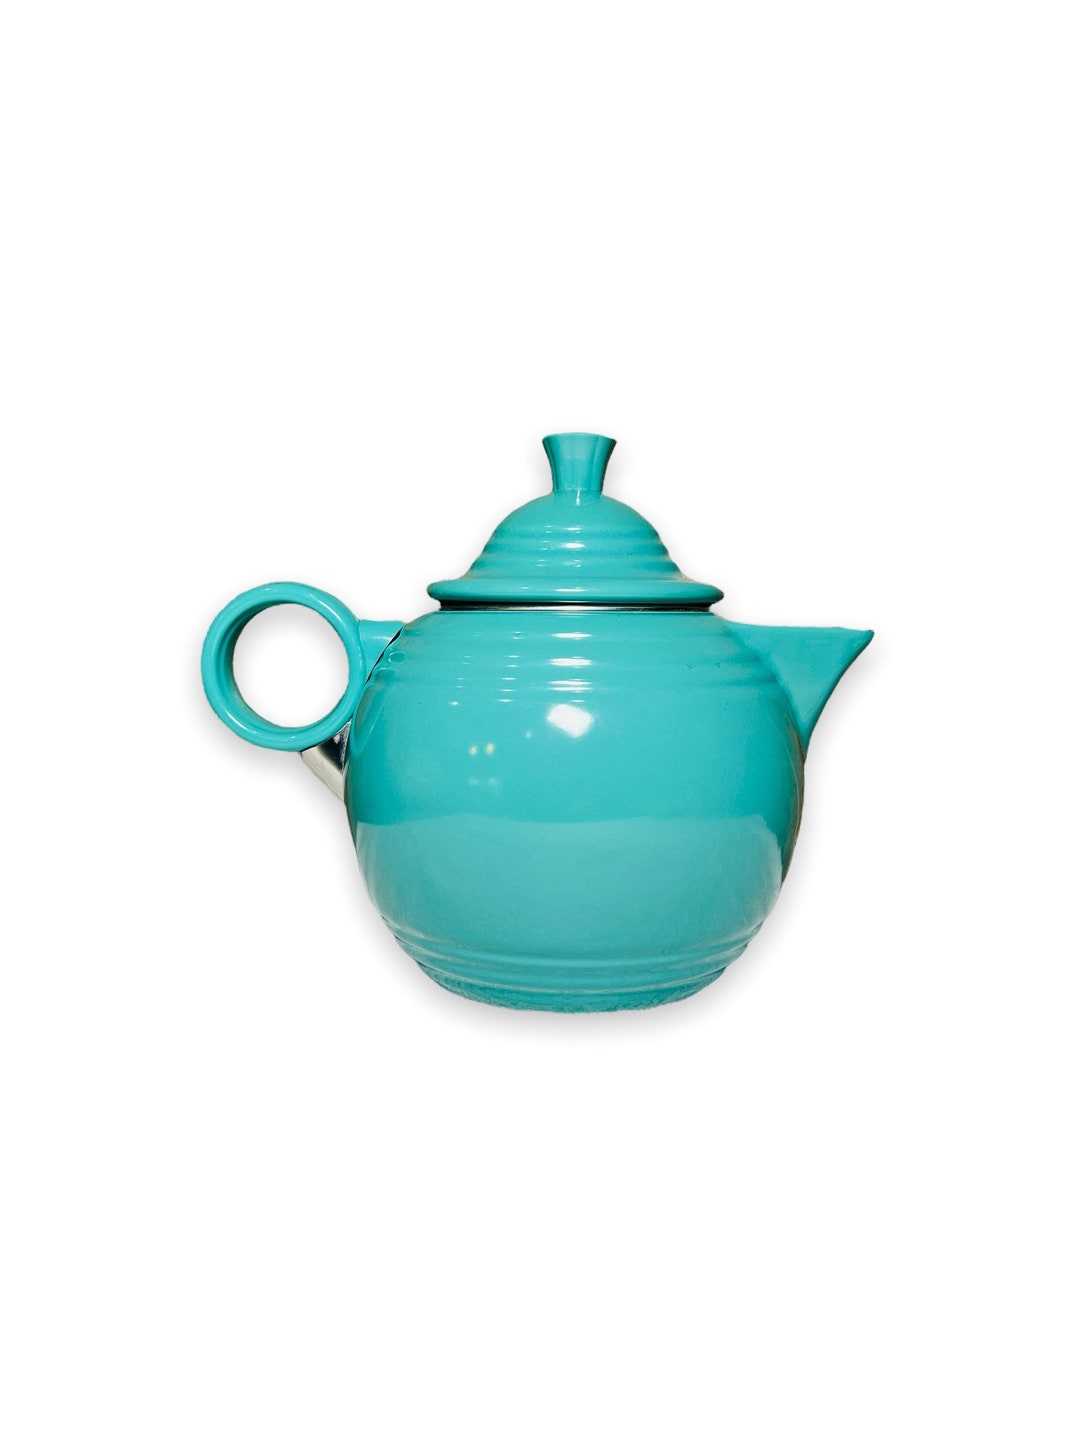 Where can I get a lid for this Bella ceramic kettle? : r/kettles